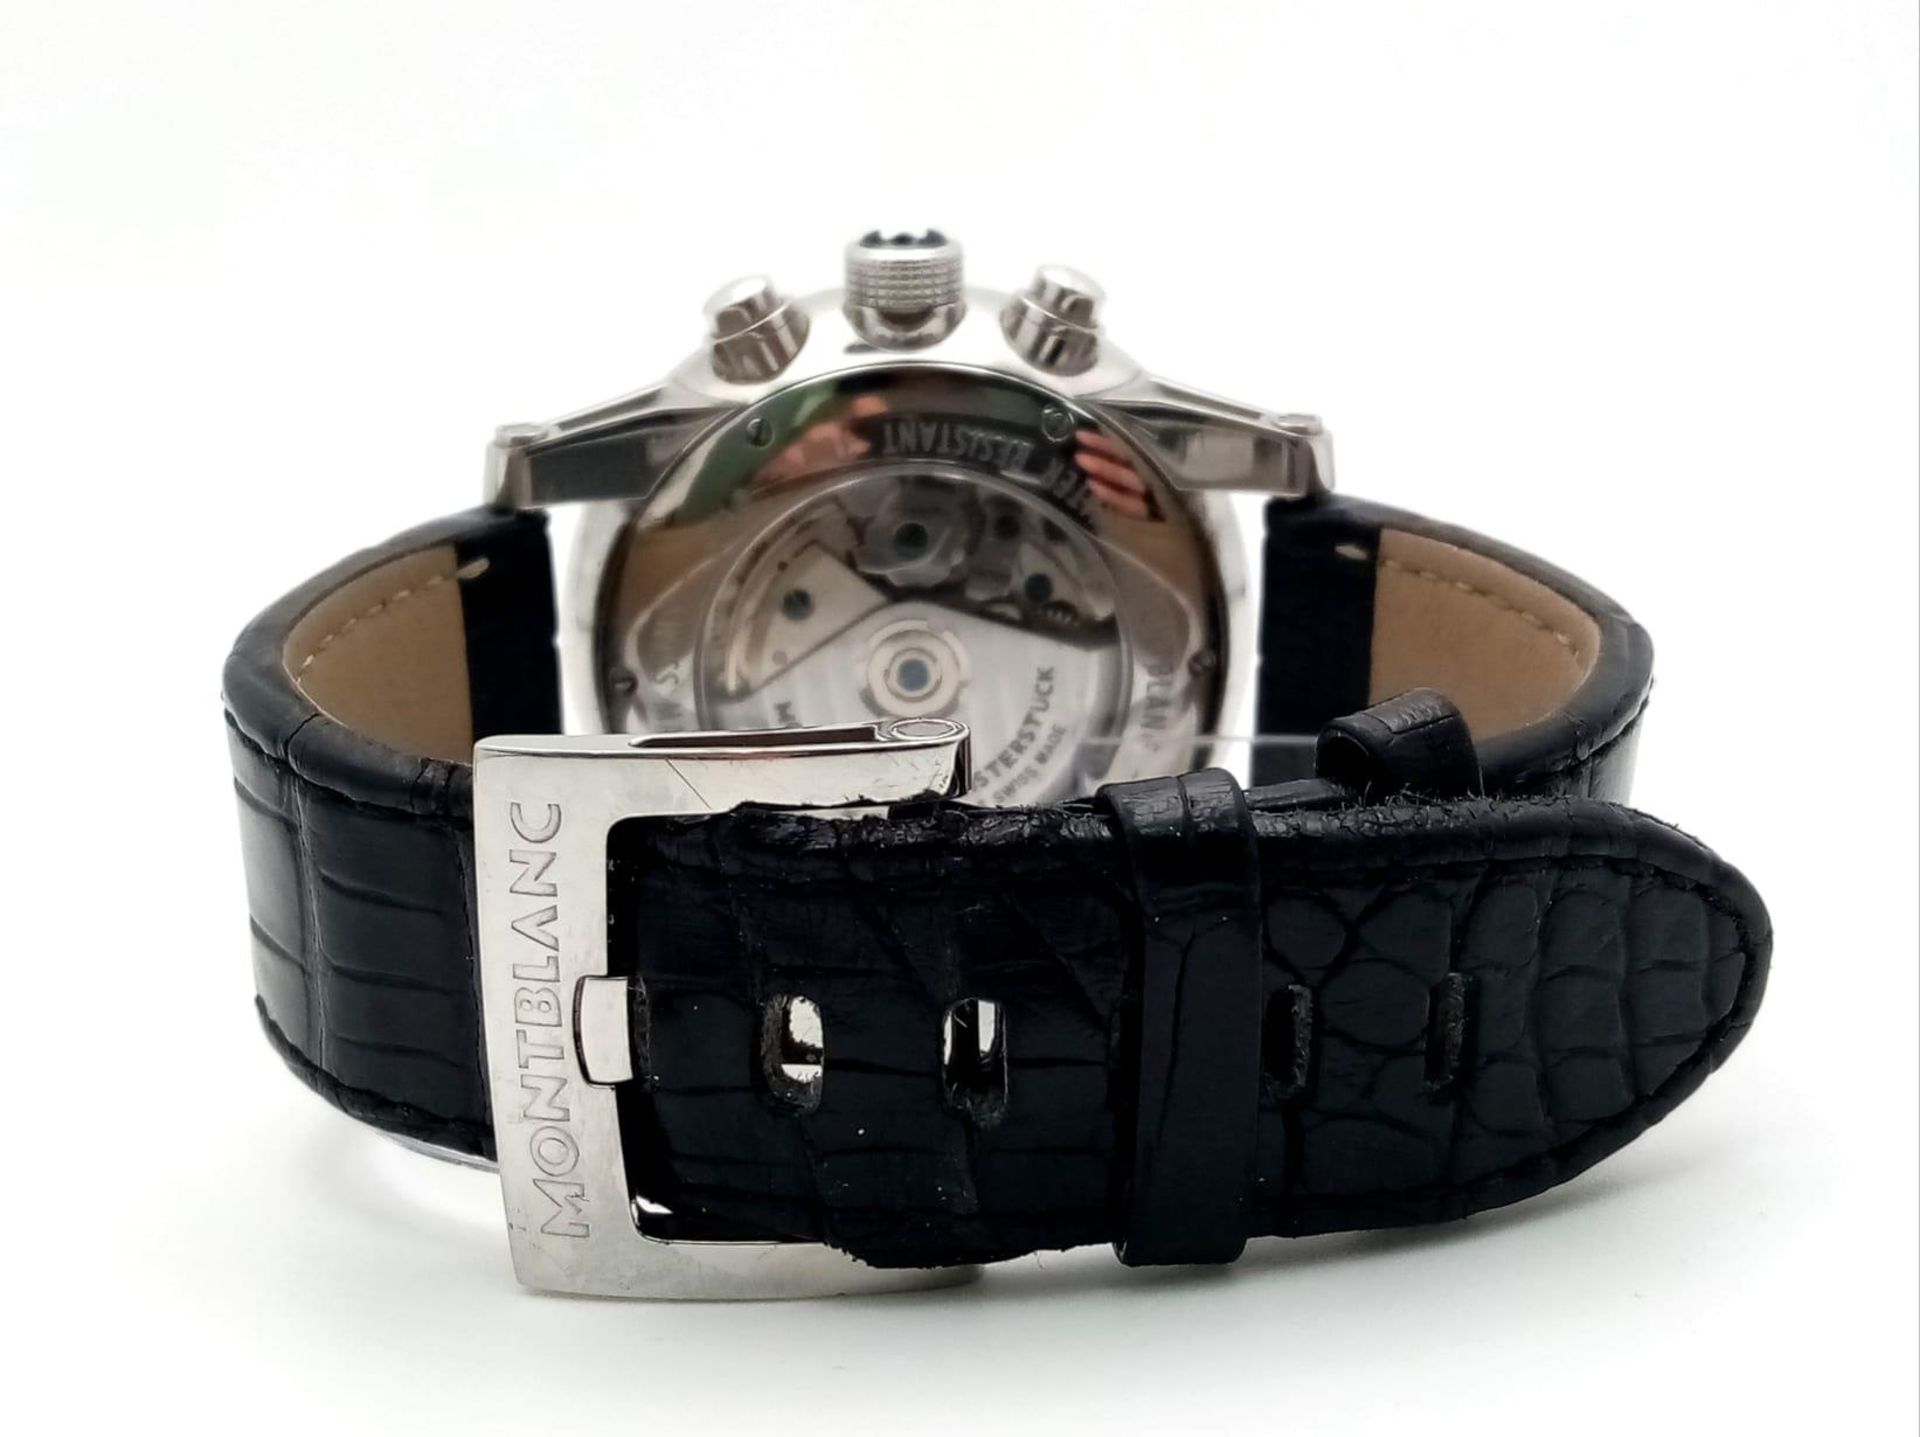 A "MONTBLANC" AUTOMATIC CHRONOGRAPH WITH 3 SUBDIALS ,STUNNING BLACK FACE , COMES WITH BOX AND - Image 5 of 8